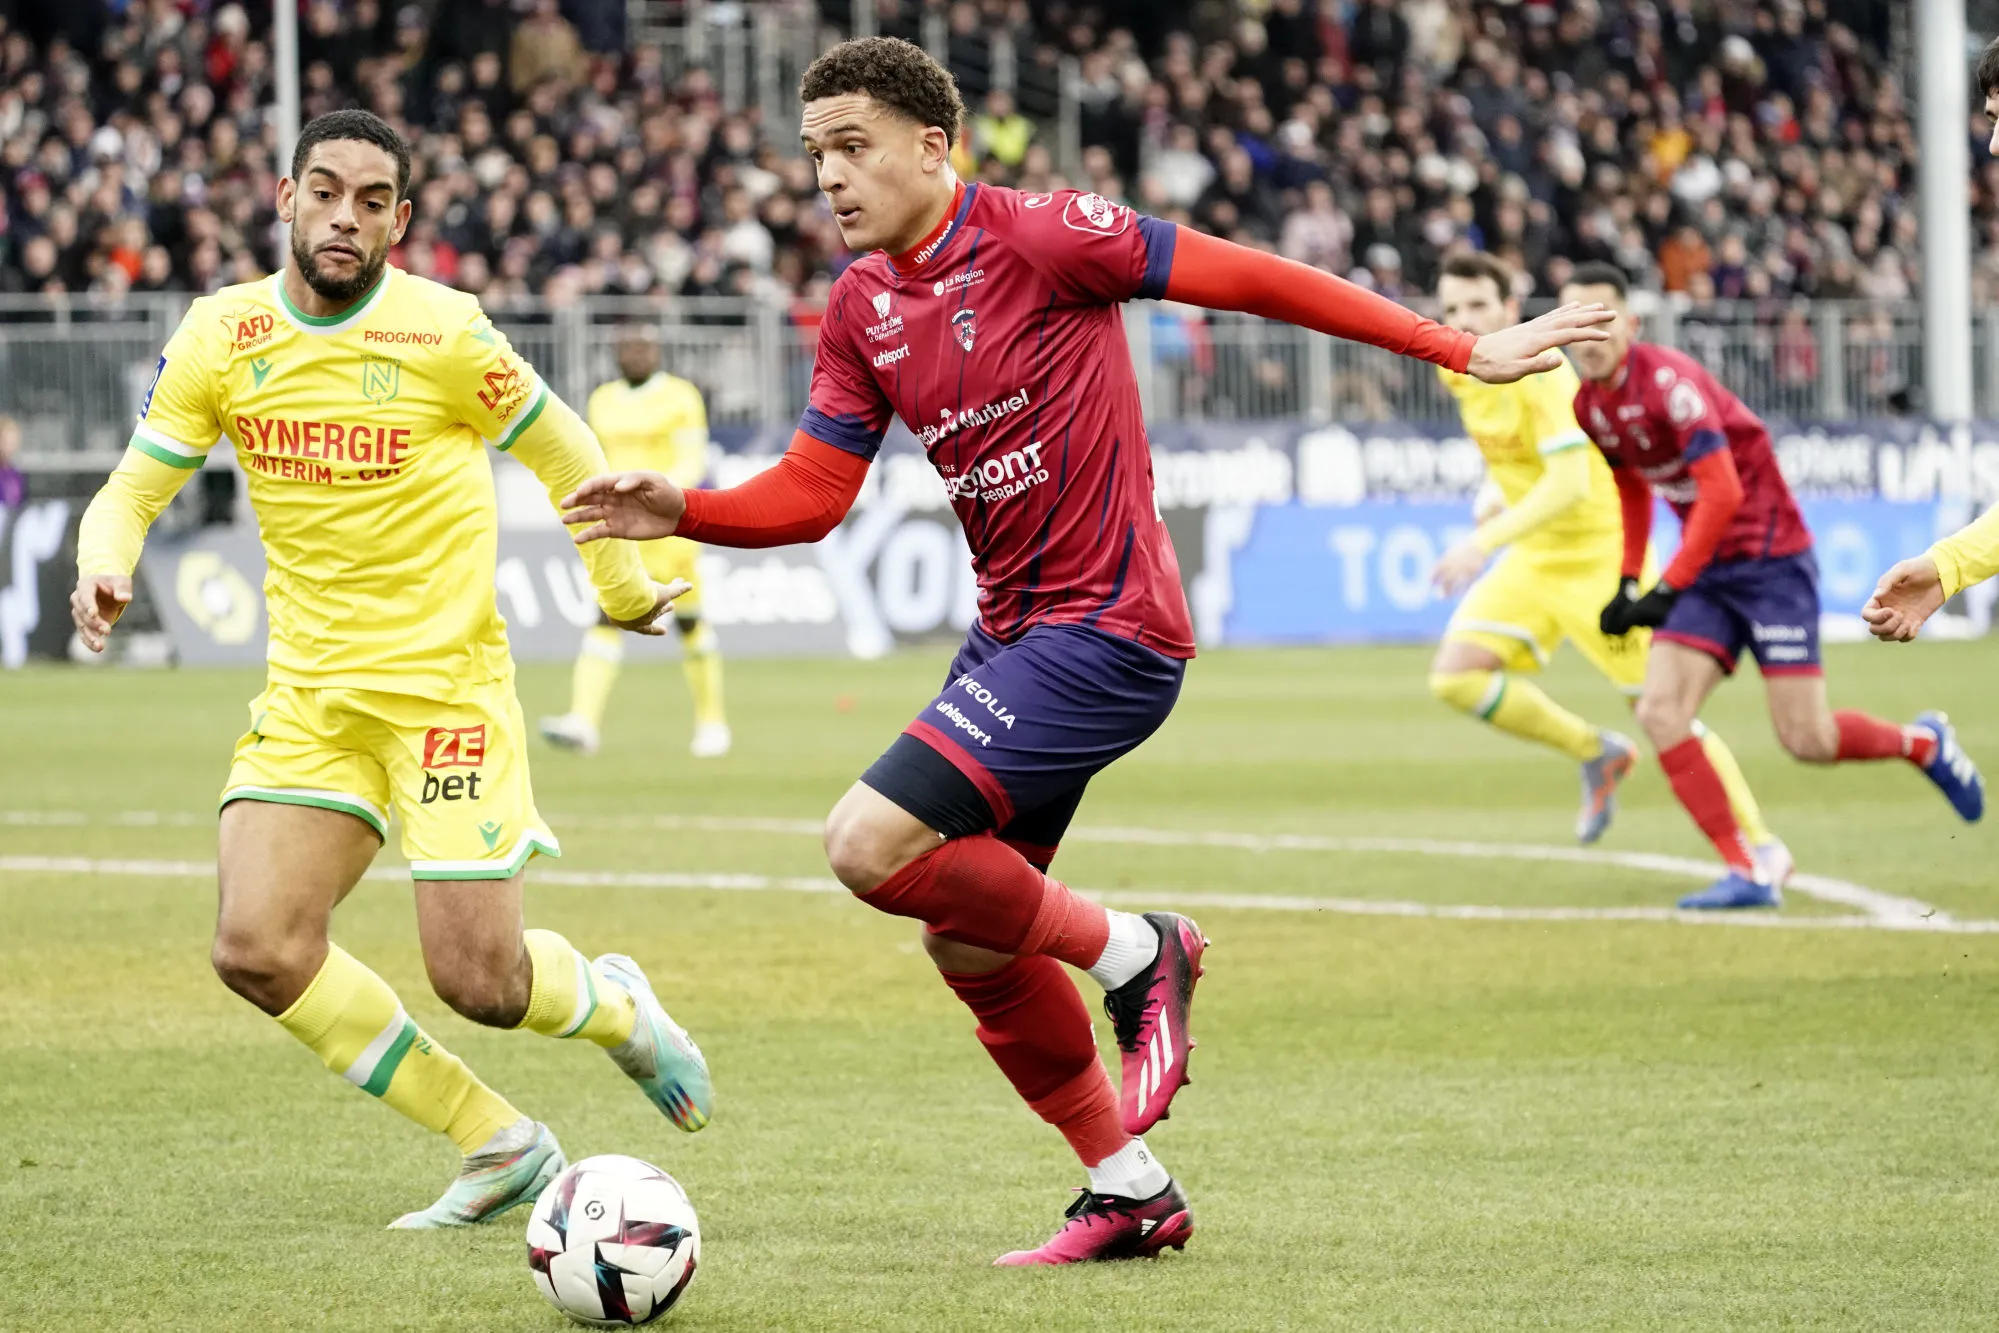 21 Jean Charles CASTELLETTO (fcn) - 03 Vivaldo BORGES DOS SANTOS NETO (cf63) during the Ligue 1 Uber Eats match between Clermont and Nantes at Stade Gabriel Montpied on January 29, 2023 in Clermont-Ferrand, France. (Photo by Dave Winter/FEP/Icon Sport)